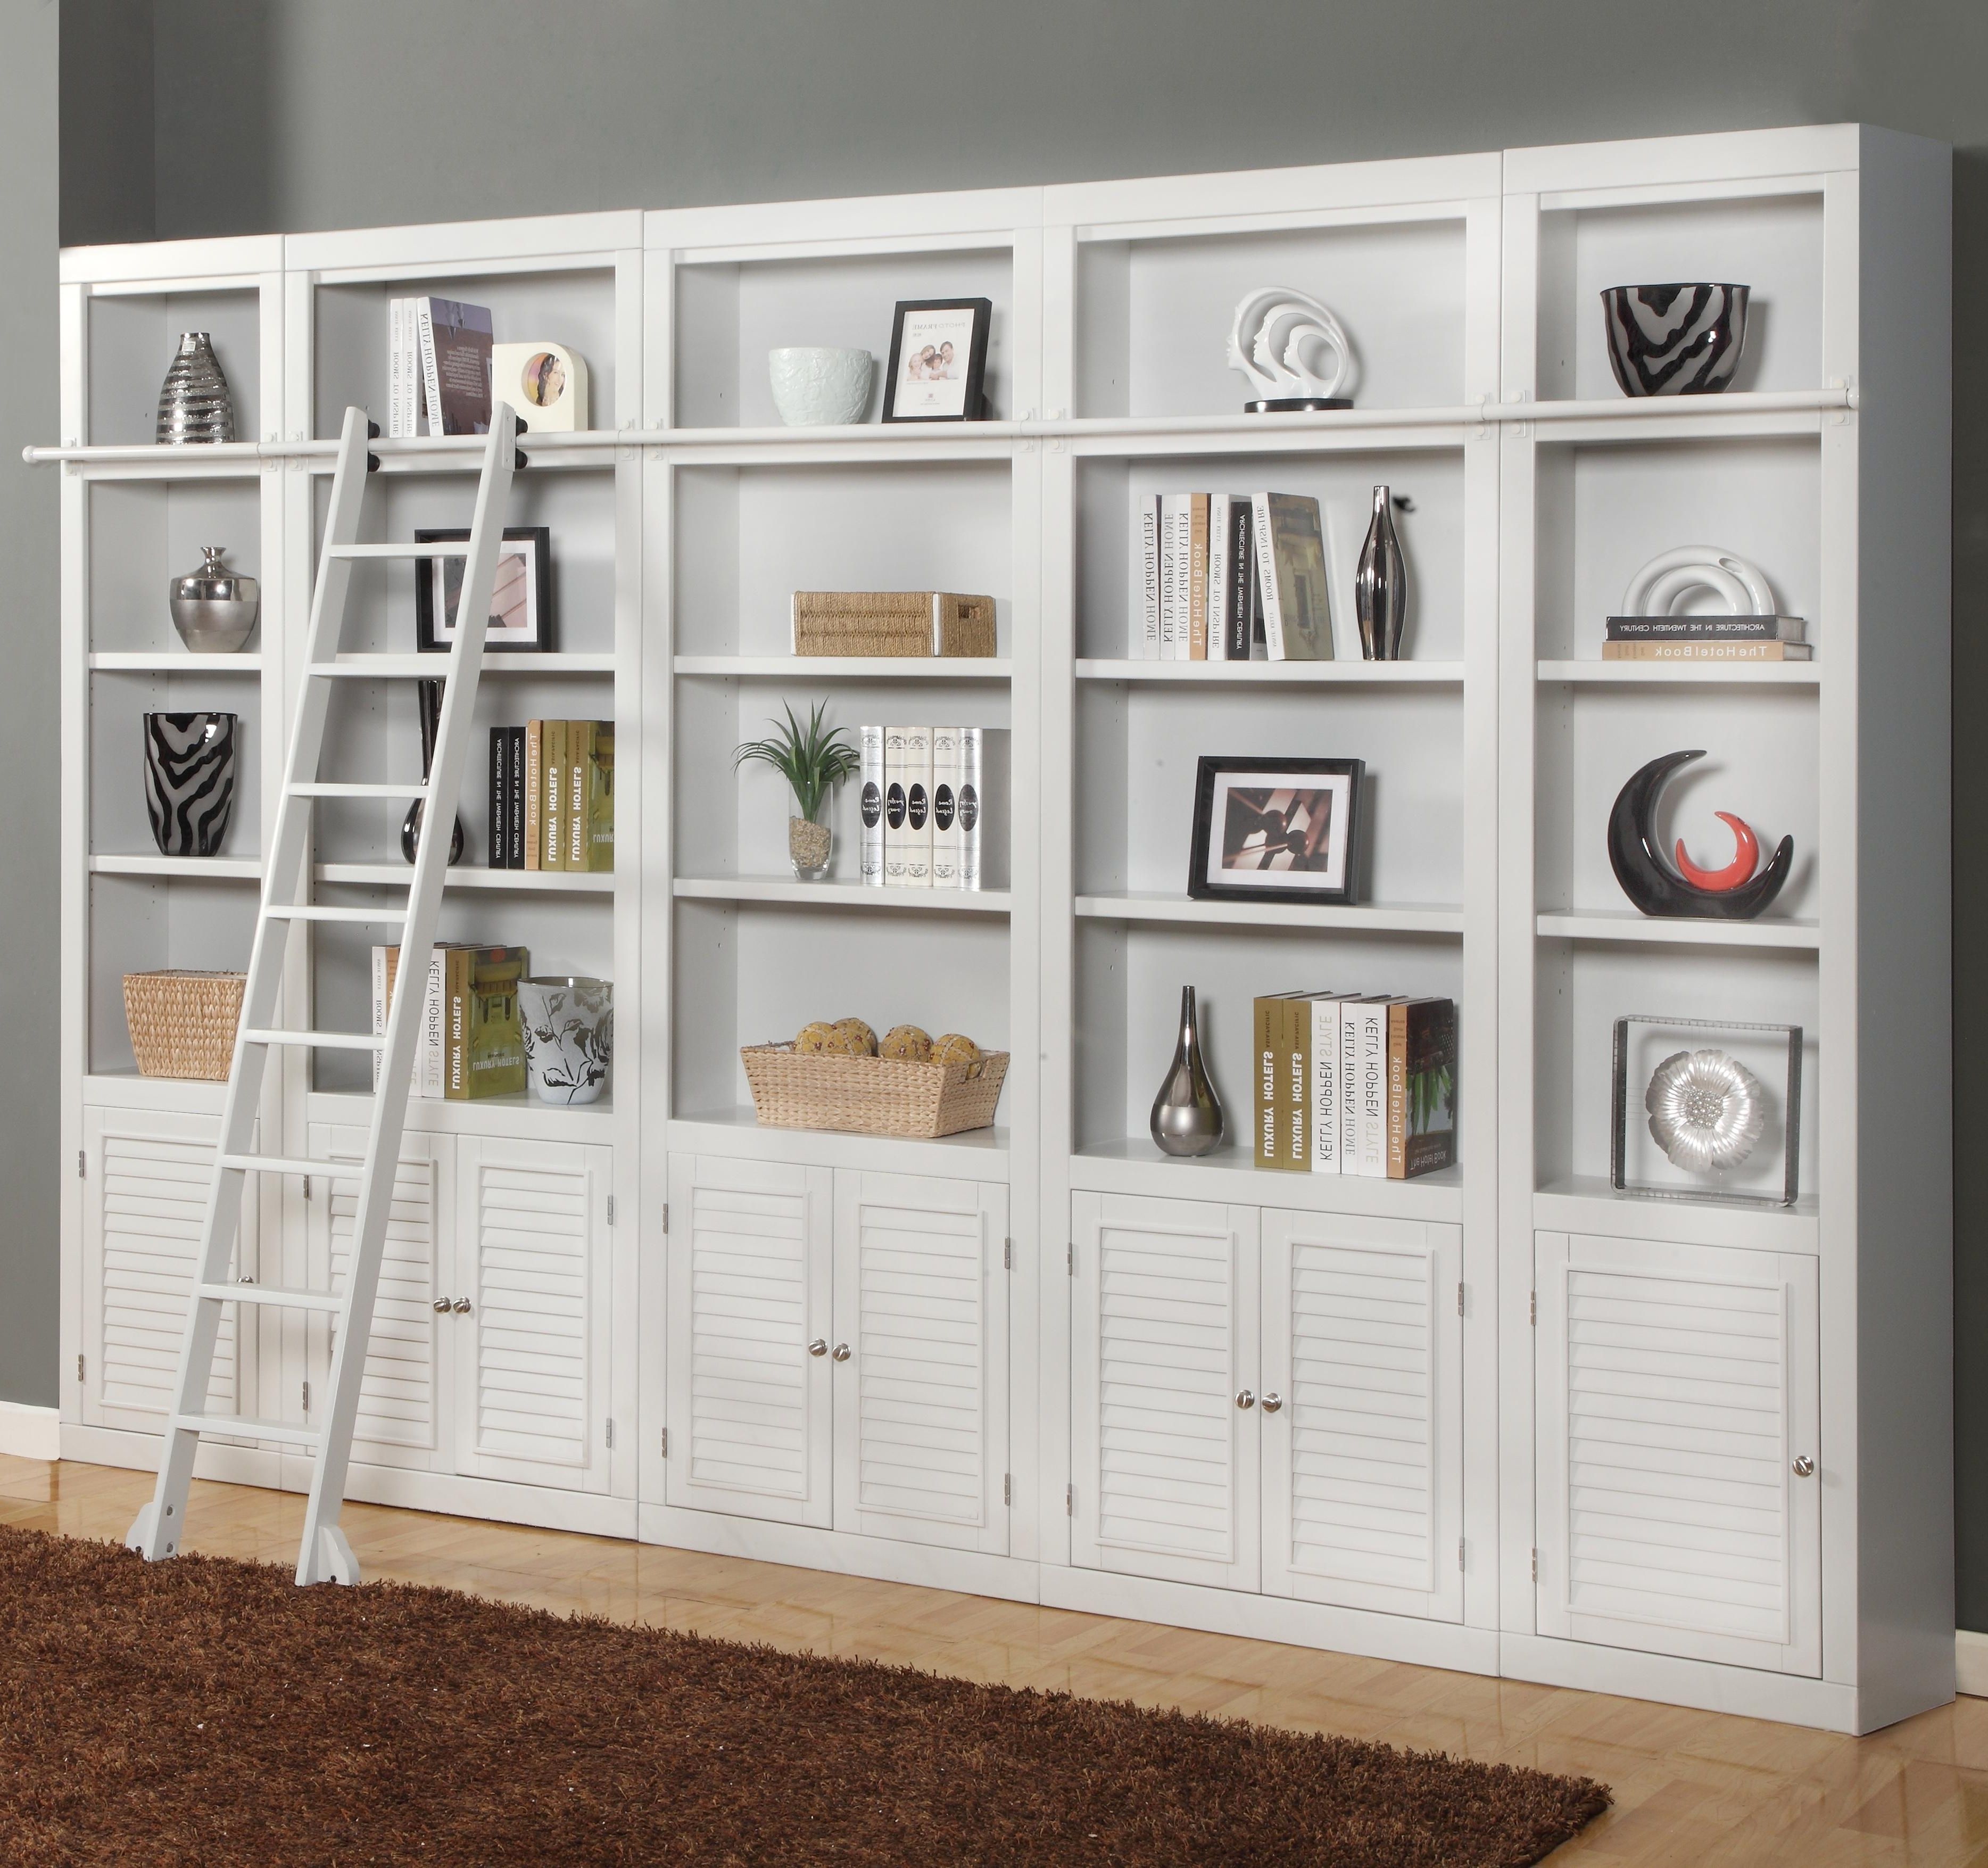 Preferred Bookshelf: Stunning Bookcase Wall Unit Bookcases Furniture Throughout Build Bookcases Wall (View 10 of 15)